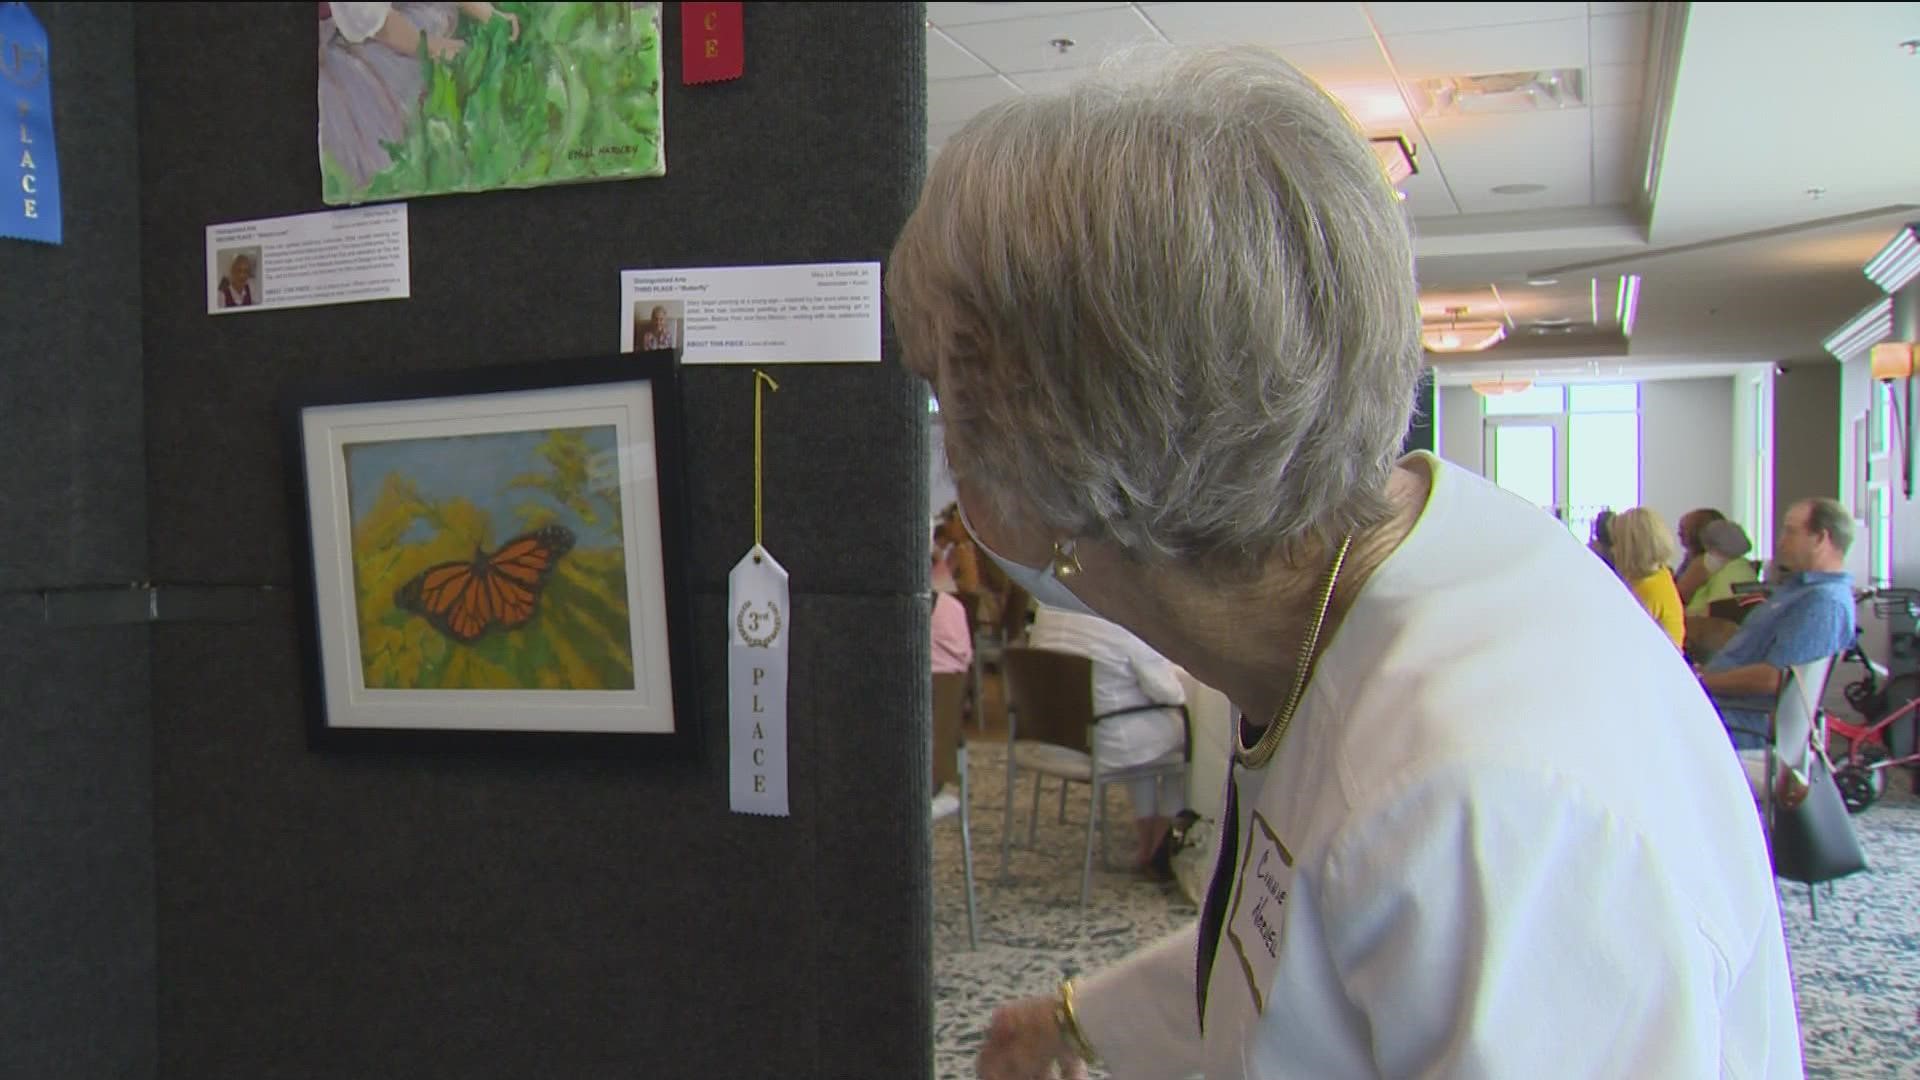 The contest showcases the artistic talents of older Texans living in retirement communities.